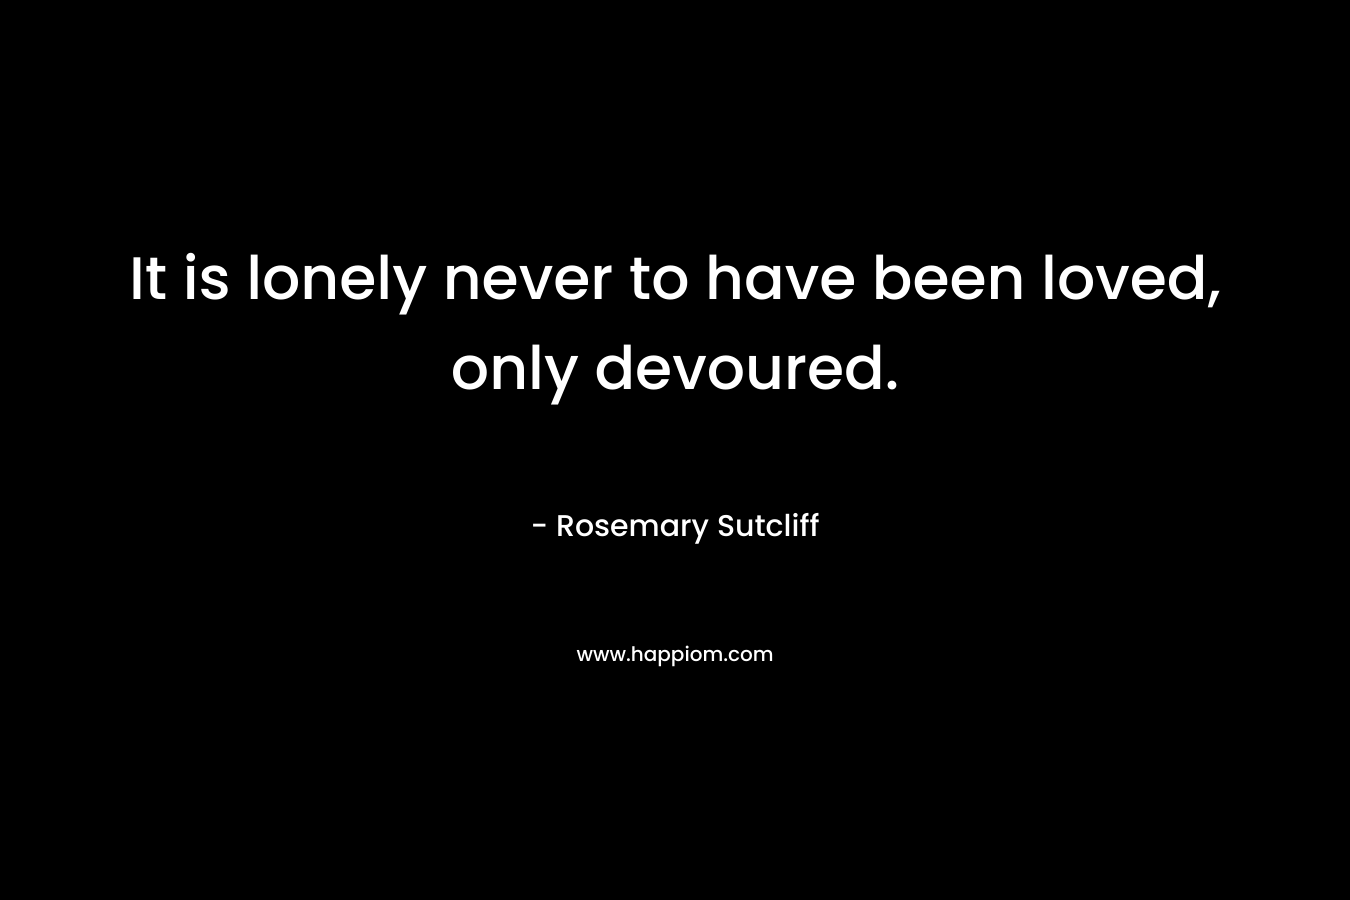 It is lonely never to have been loved, only devoured.